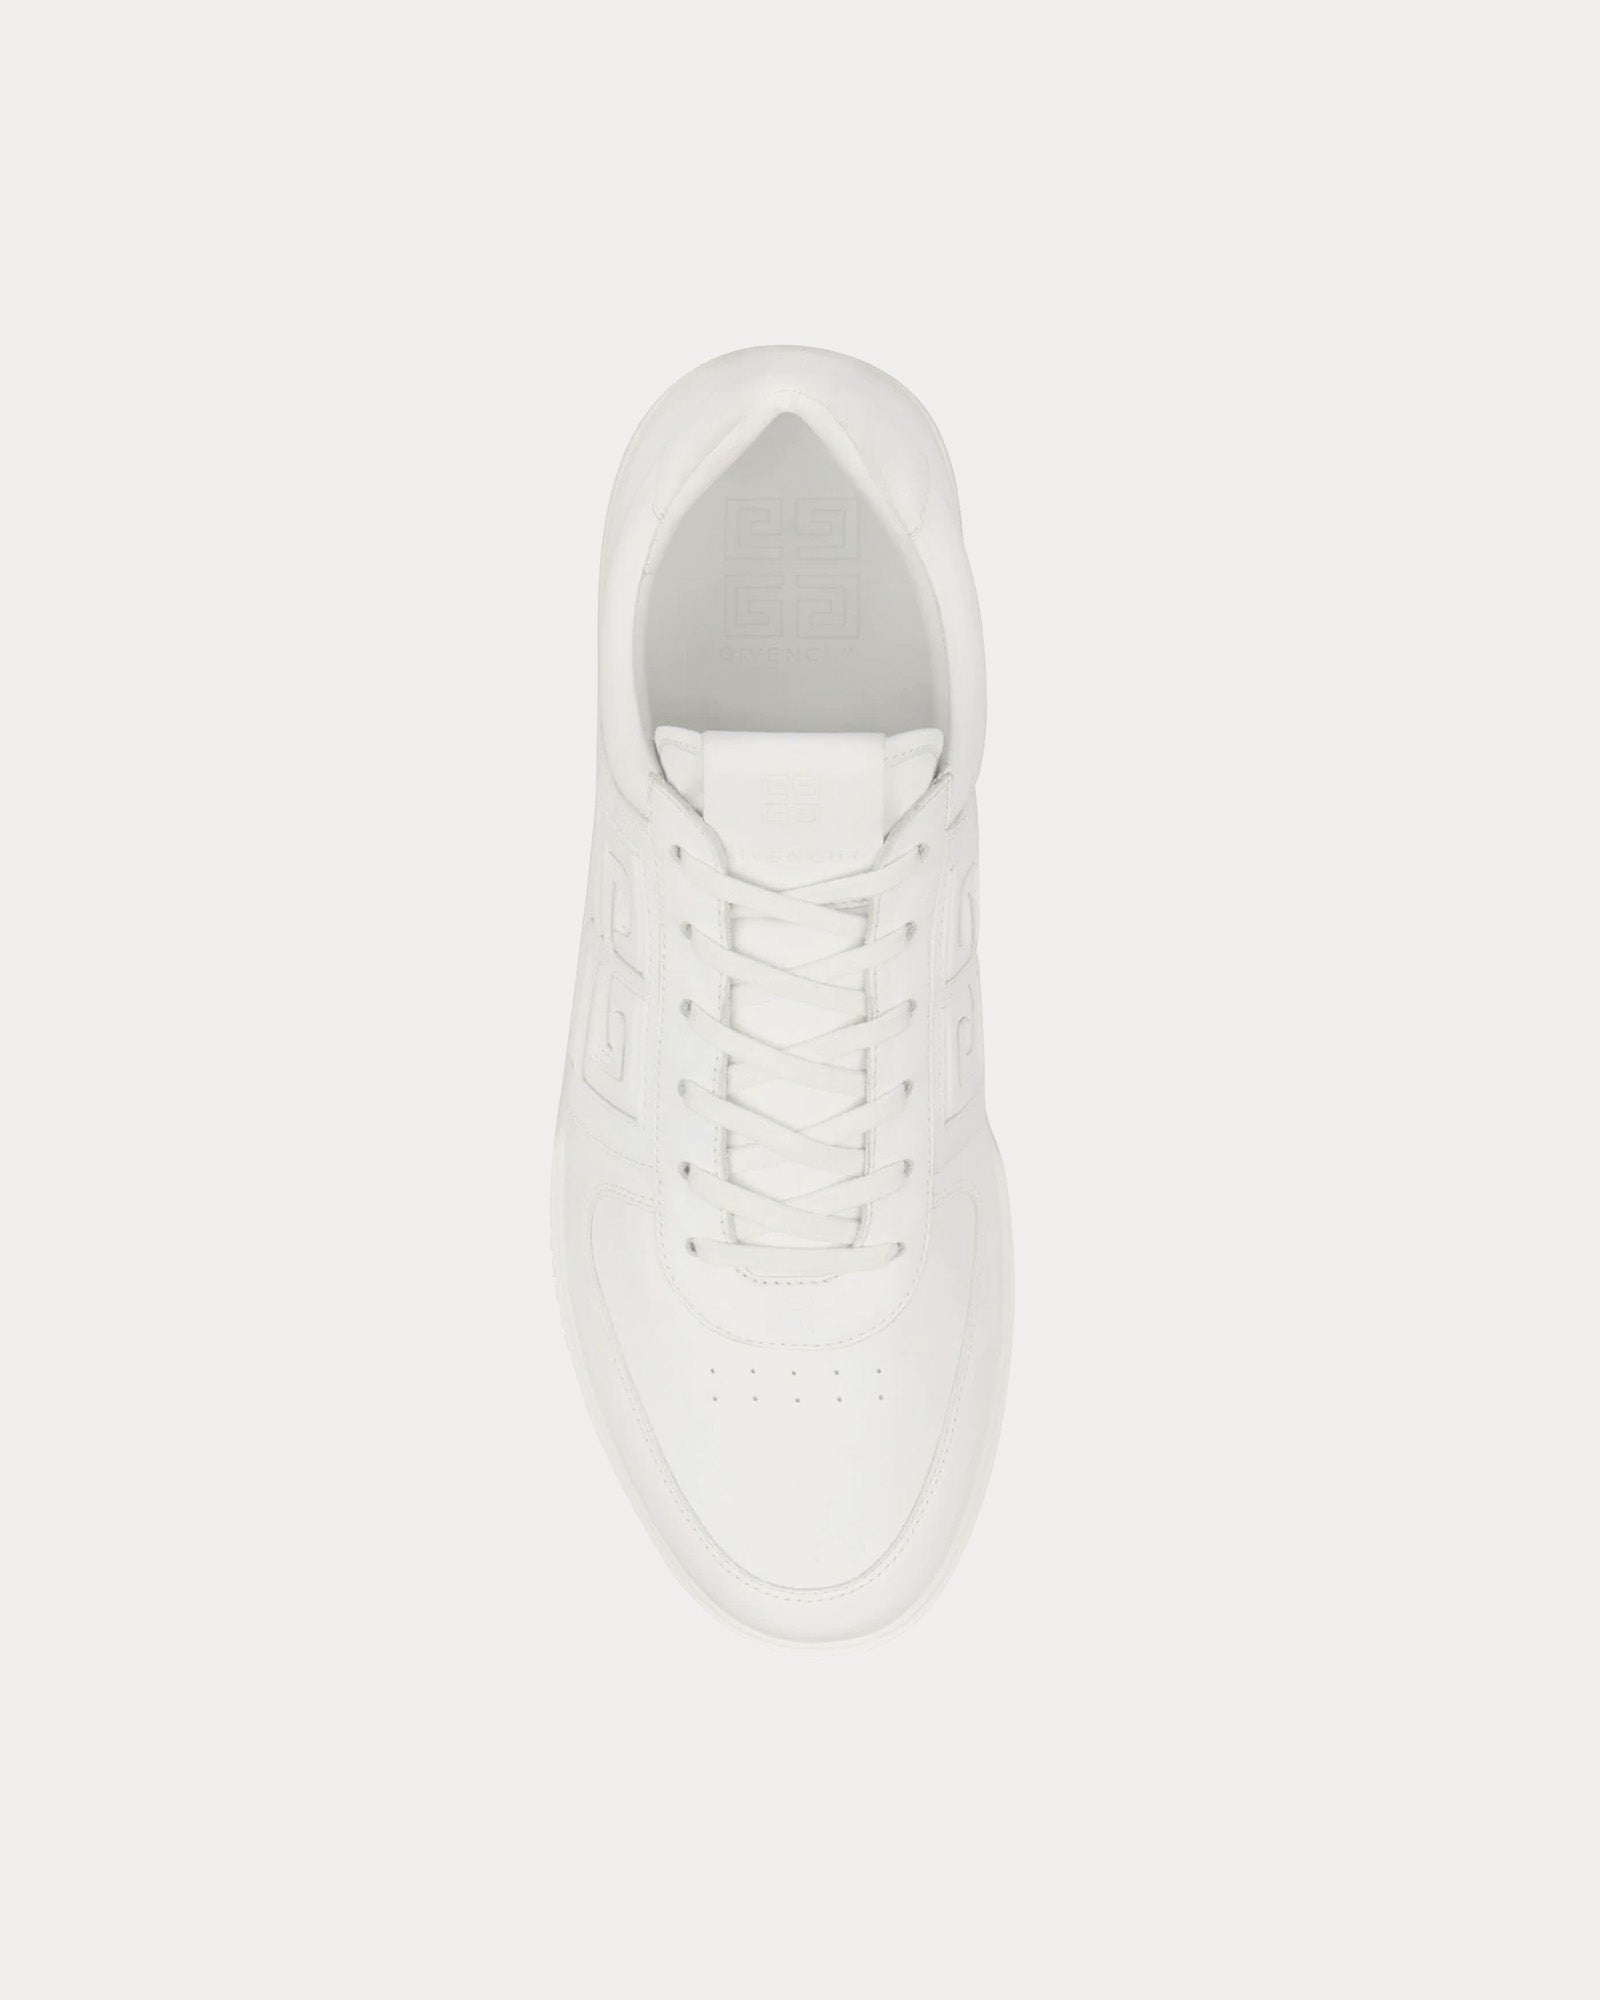 Givenchy - G4 Leather White Low Top Sneakers